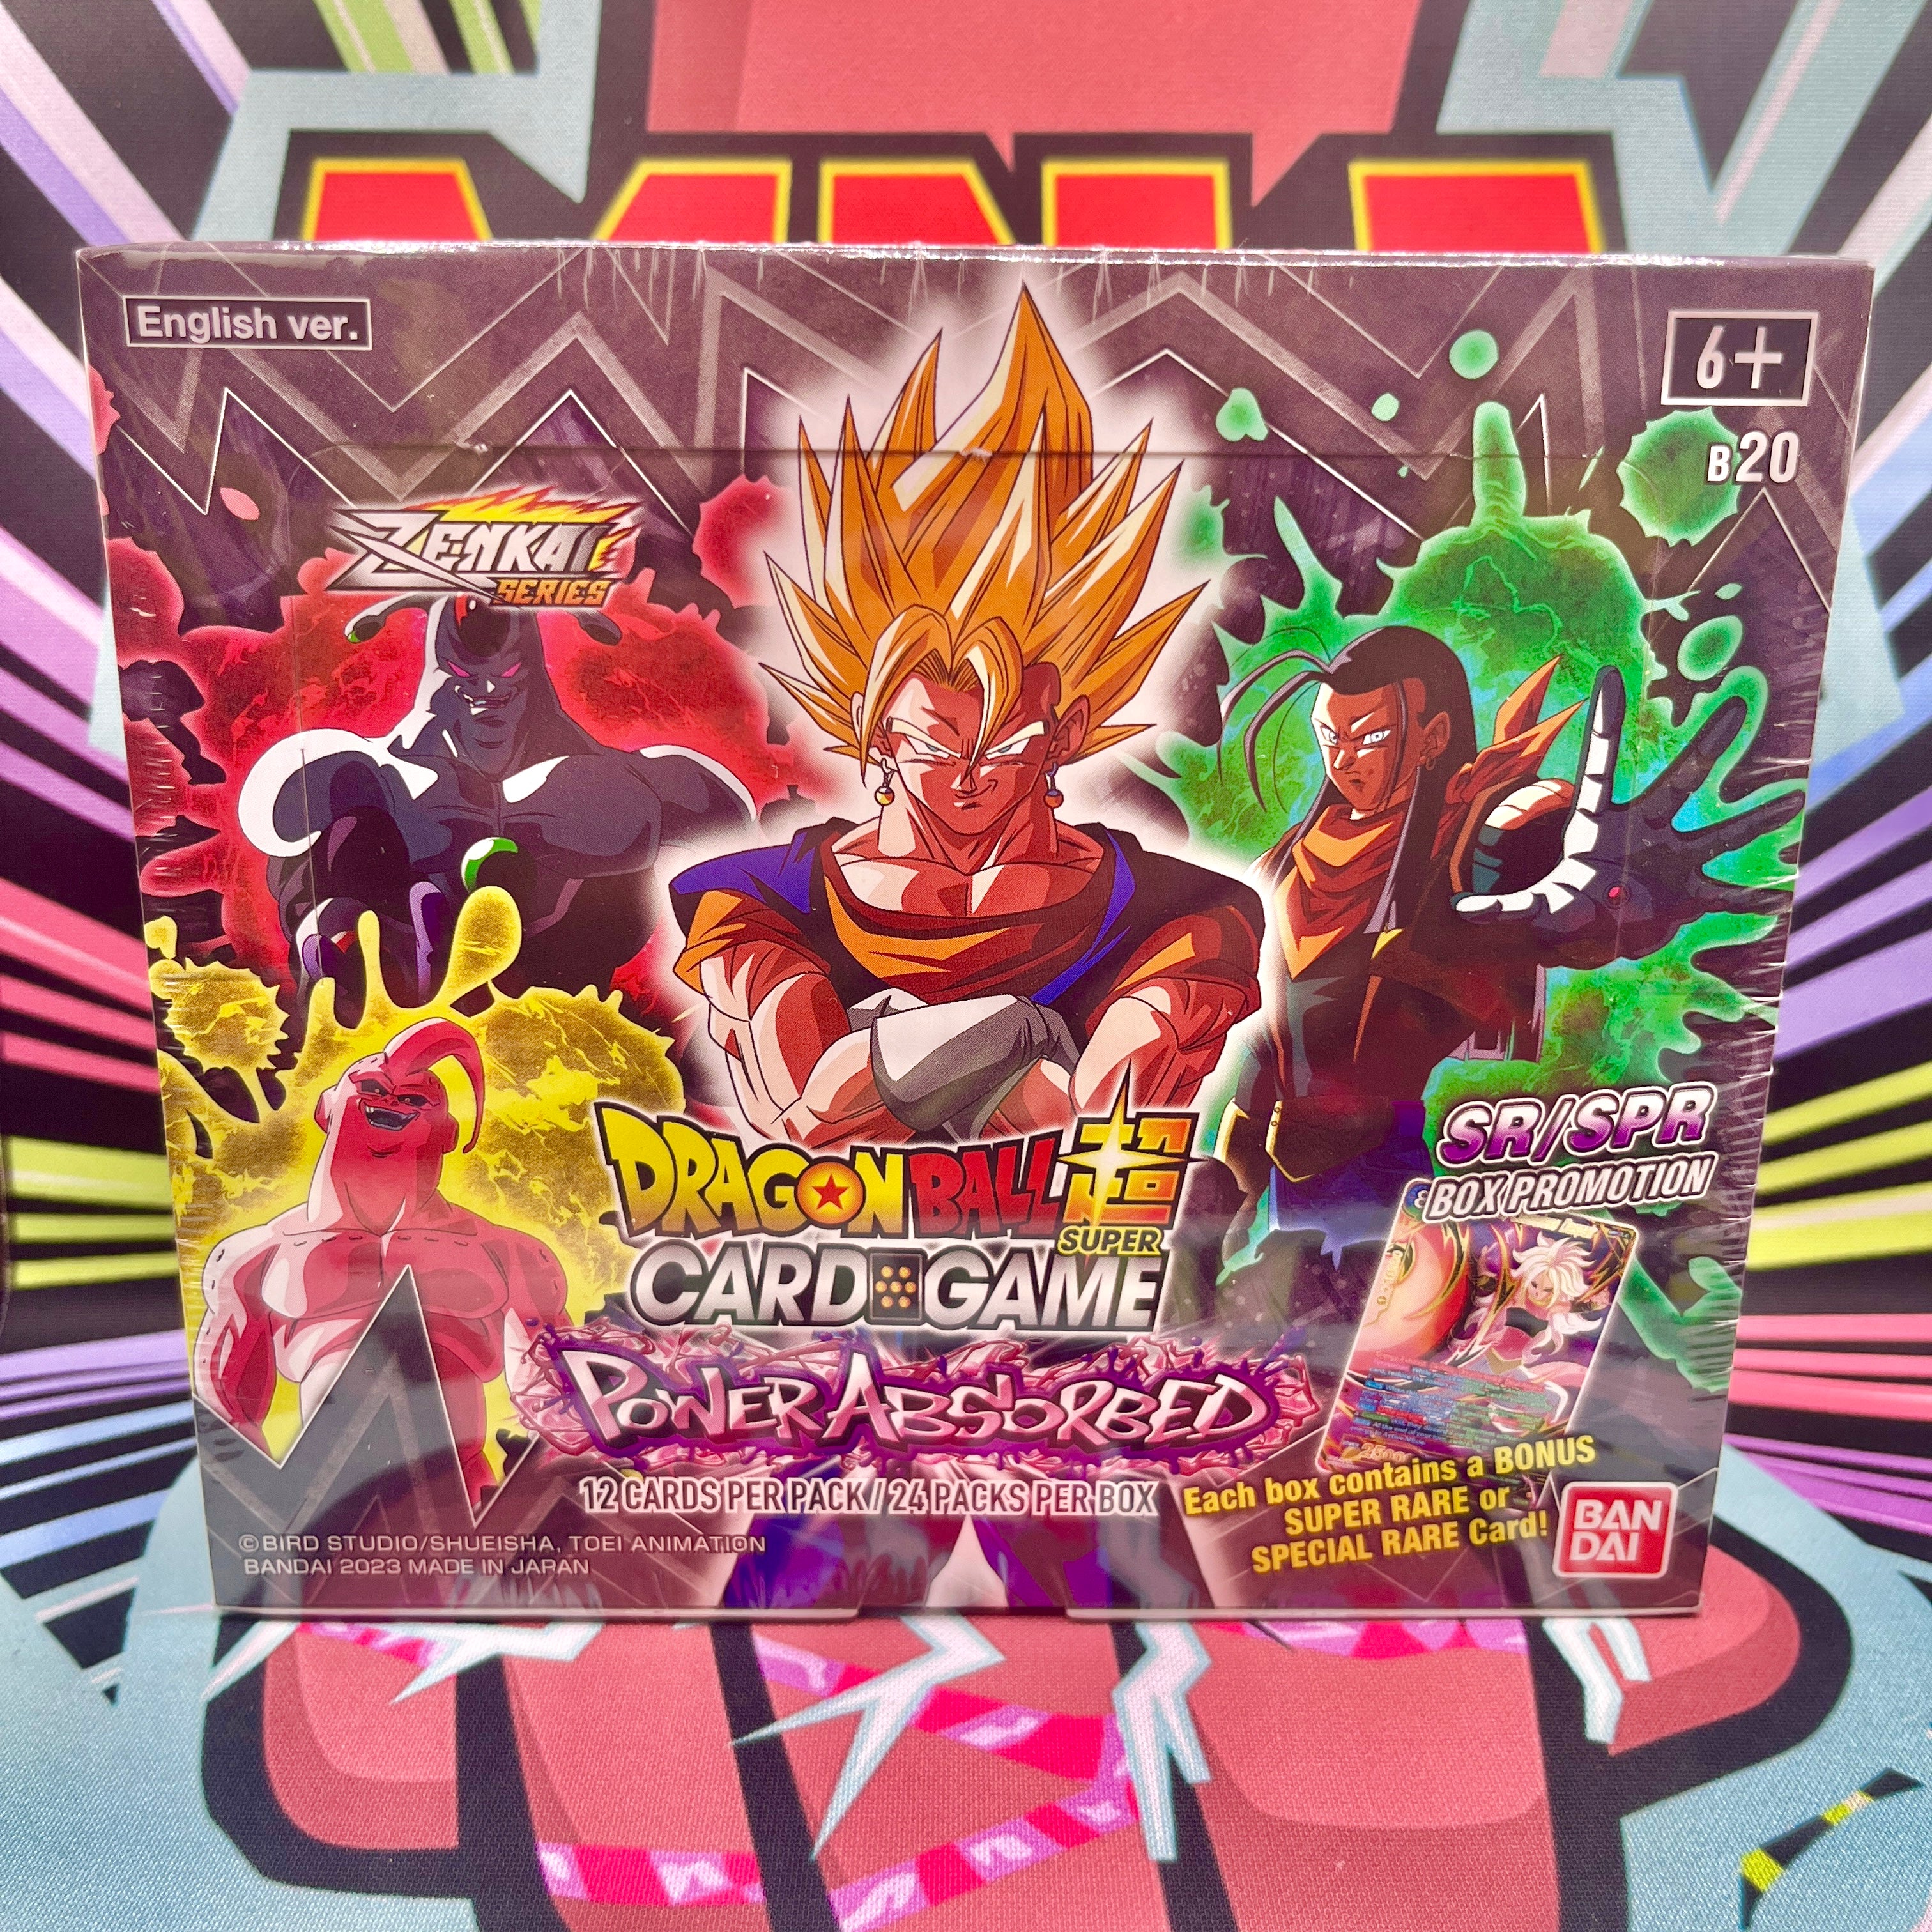 DBS-B20 Power Absorbed Booster Box (2023)